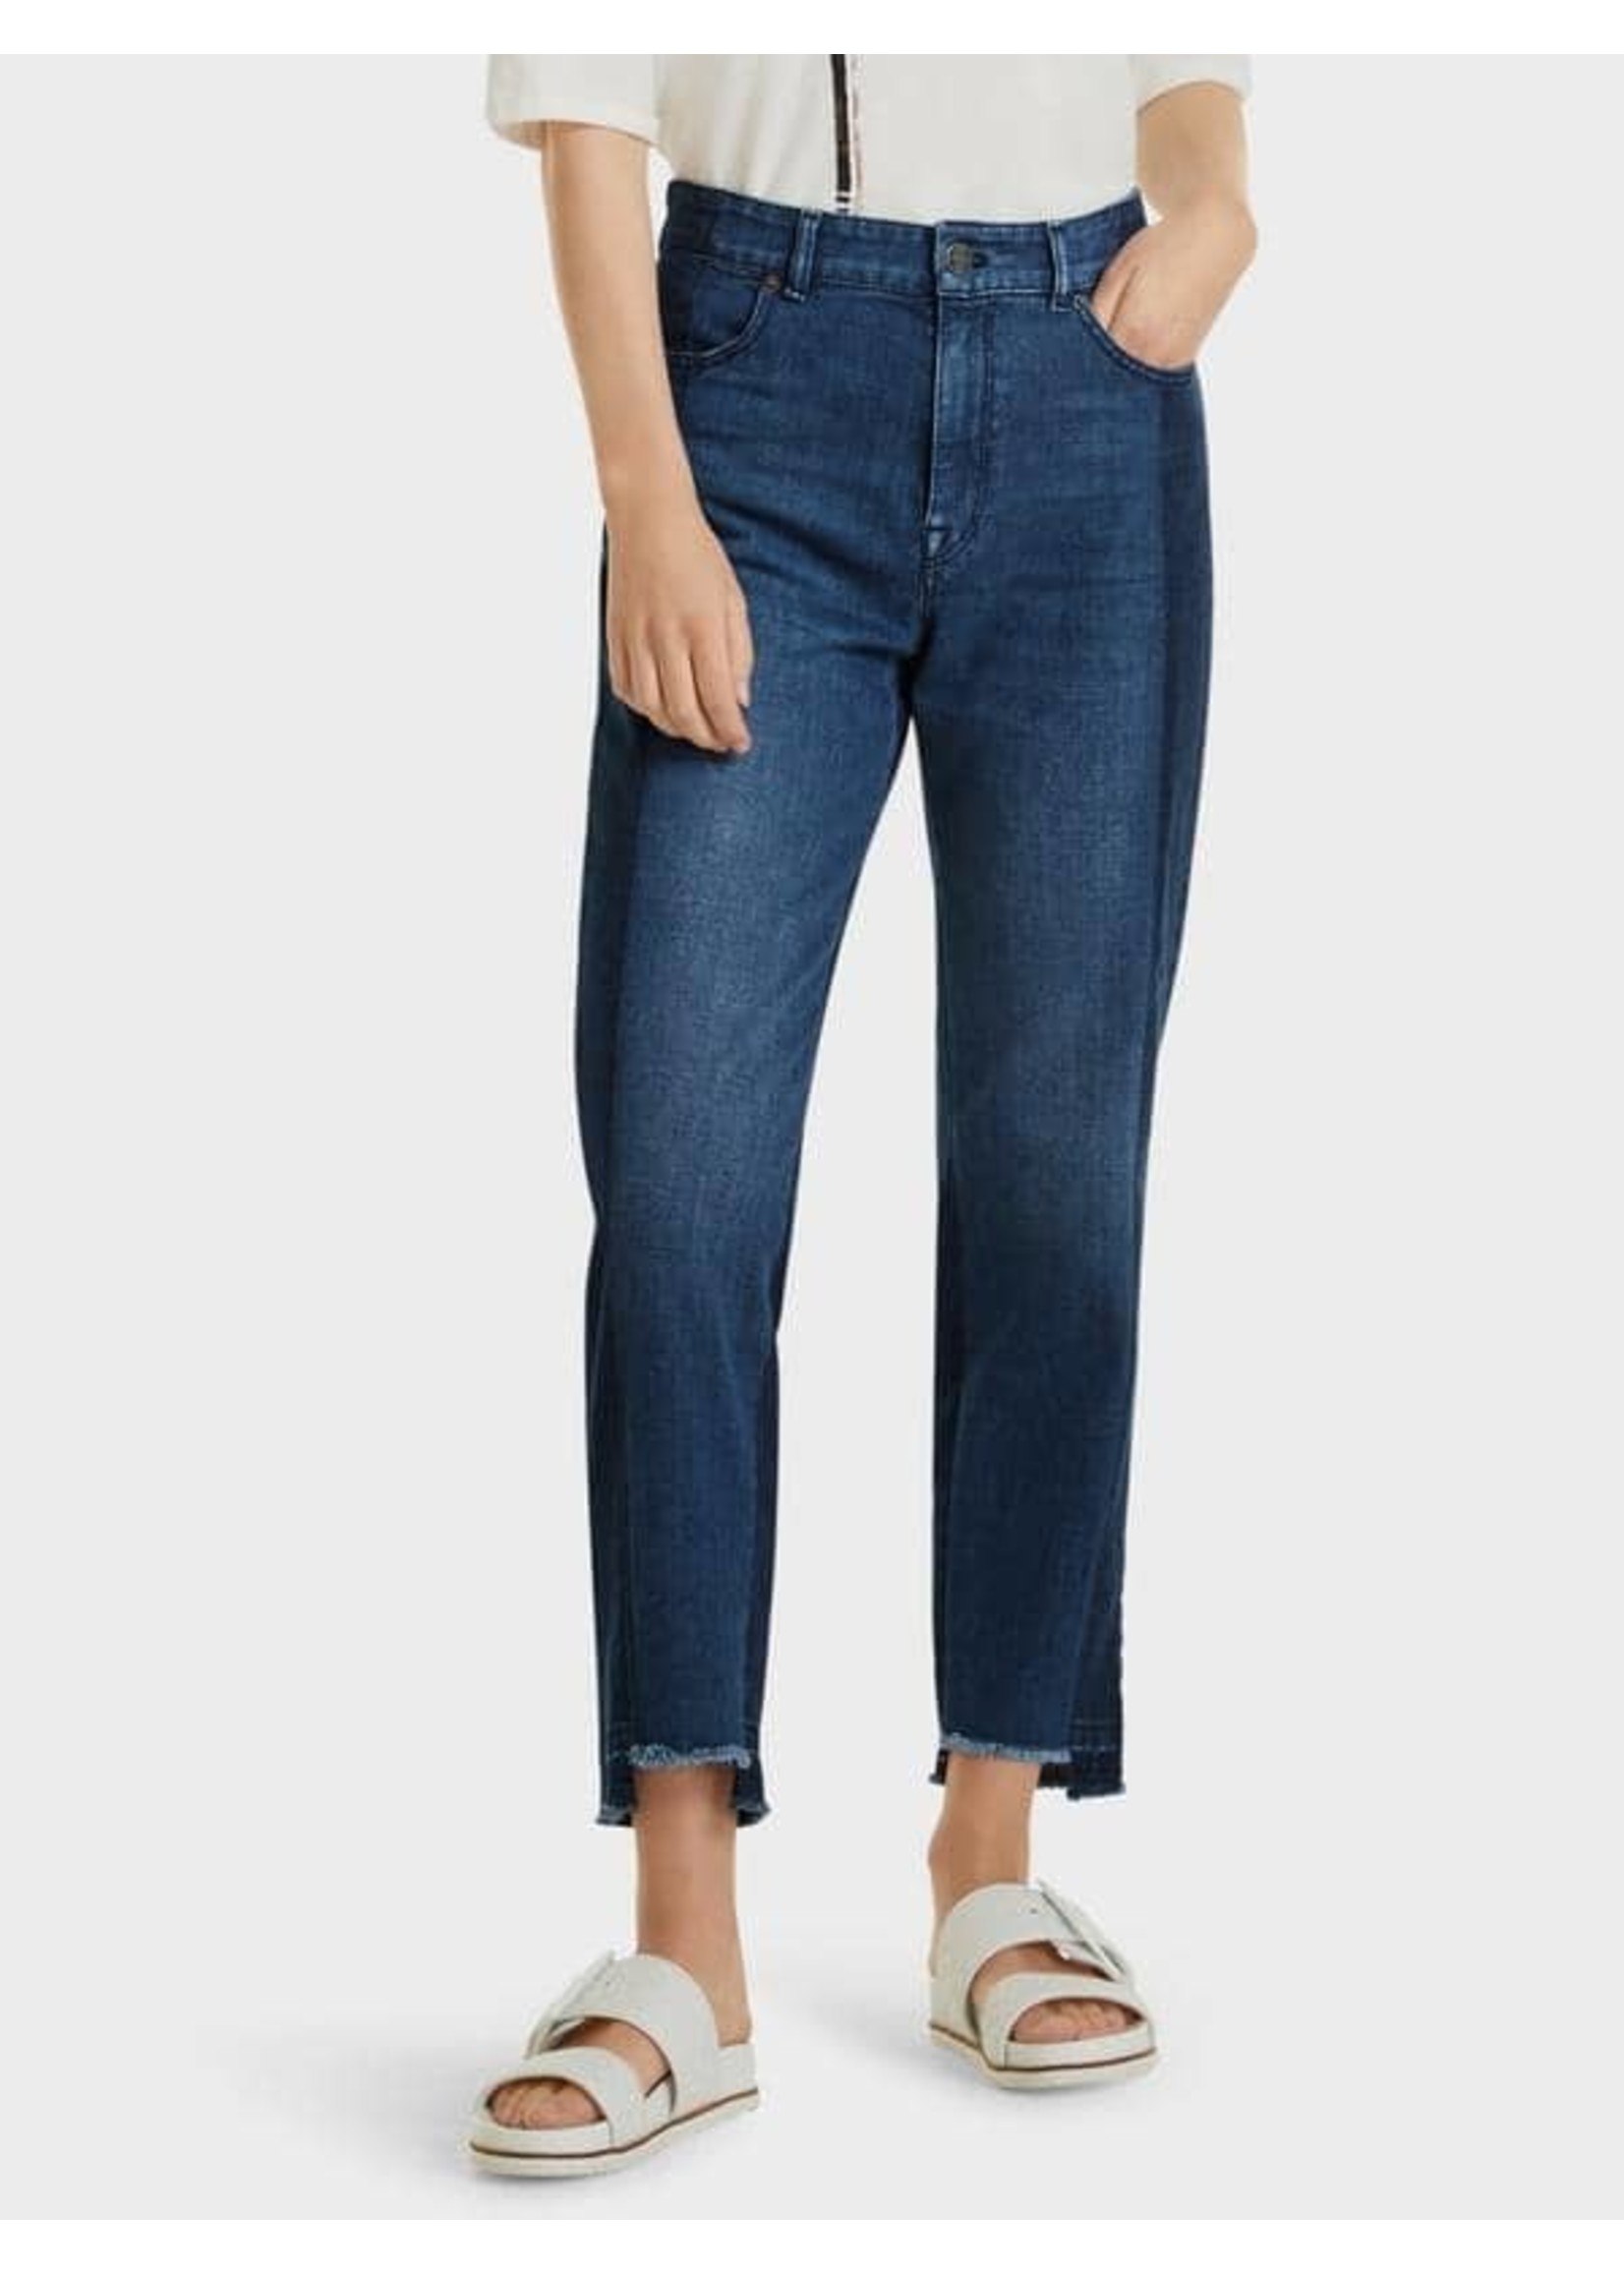 Marccain Sports Jeans SS 82.02 D09 395